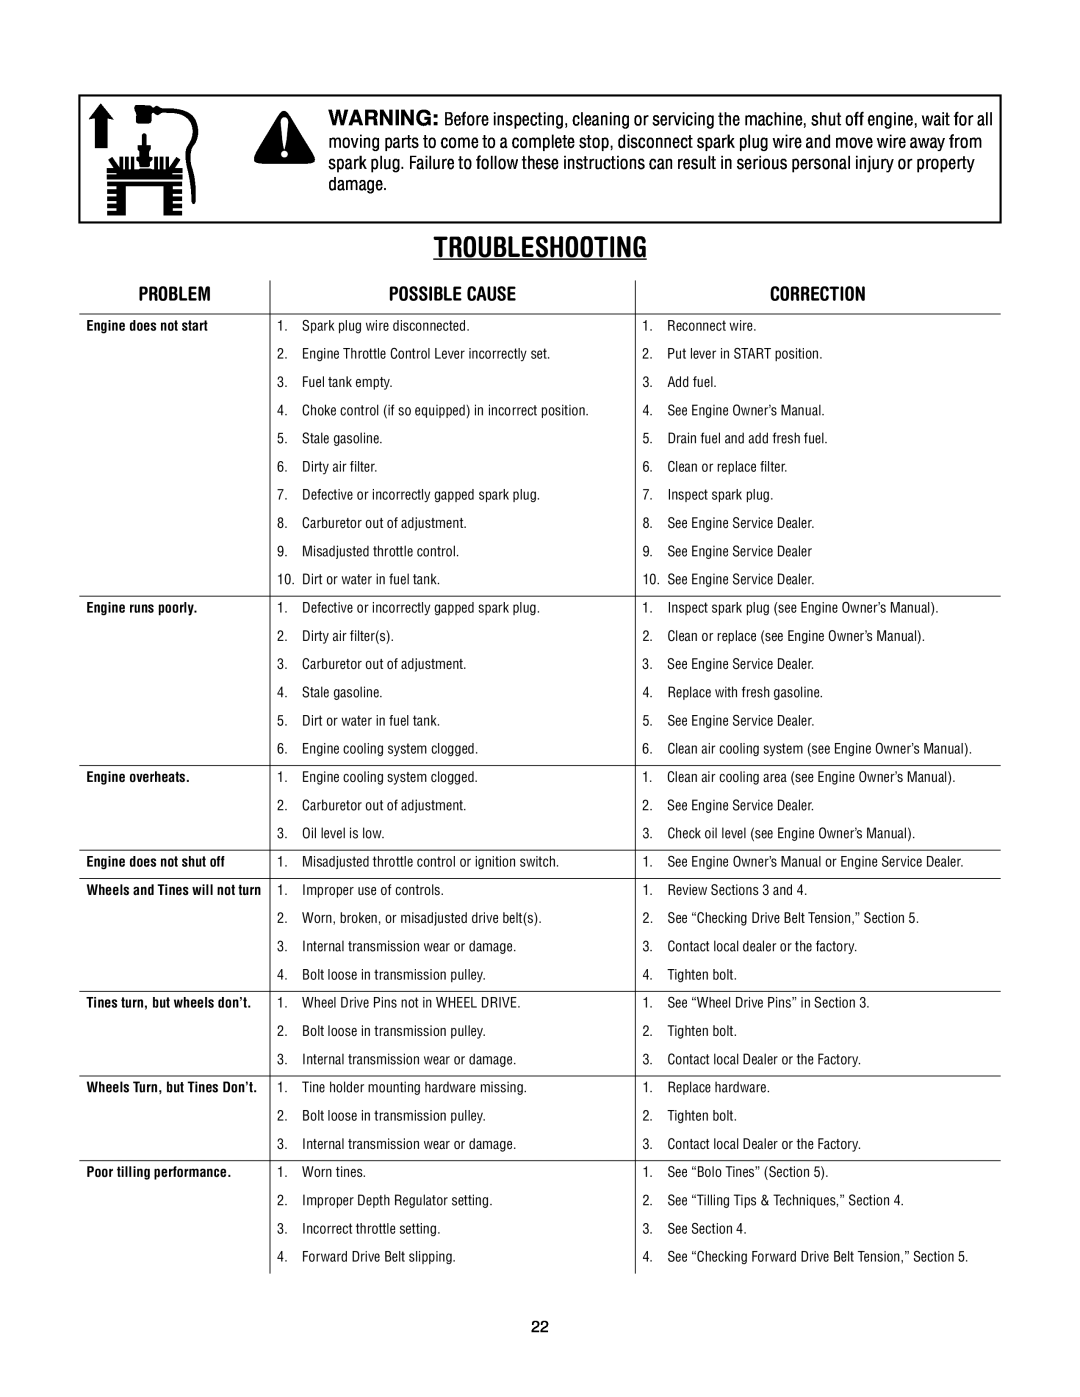 Troy-Bilt 630C-Tuffy manual Troubleshooting, Problem, Possible Cause, Correction, Engine does not start, Engine runs poorly 